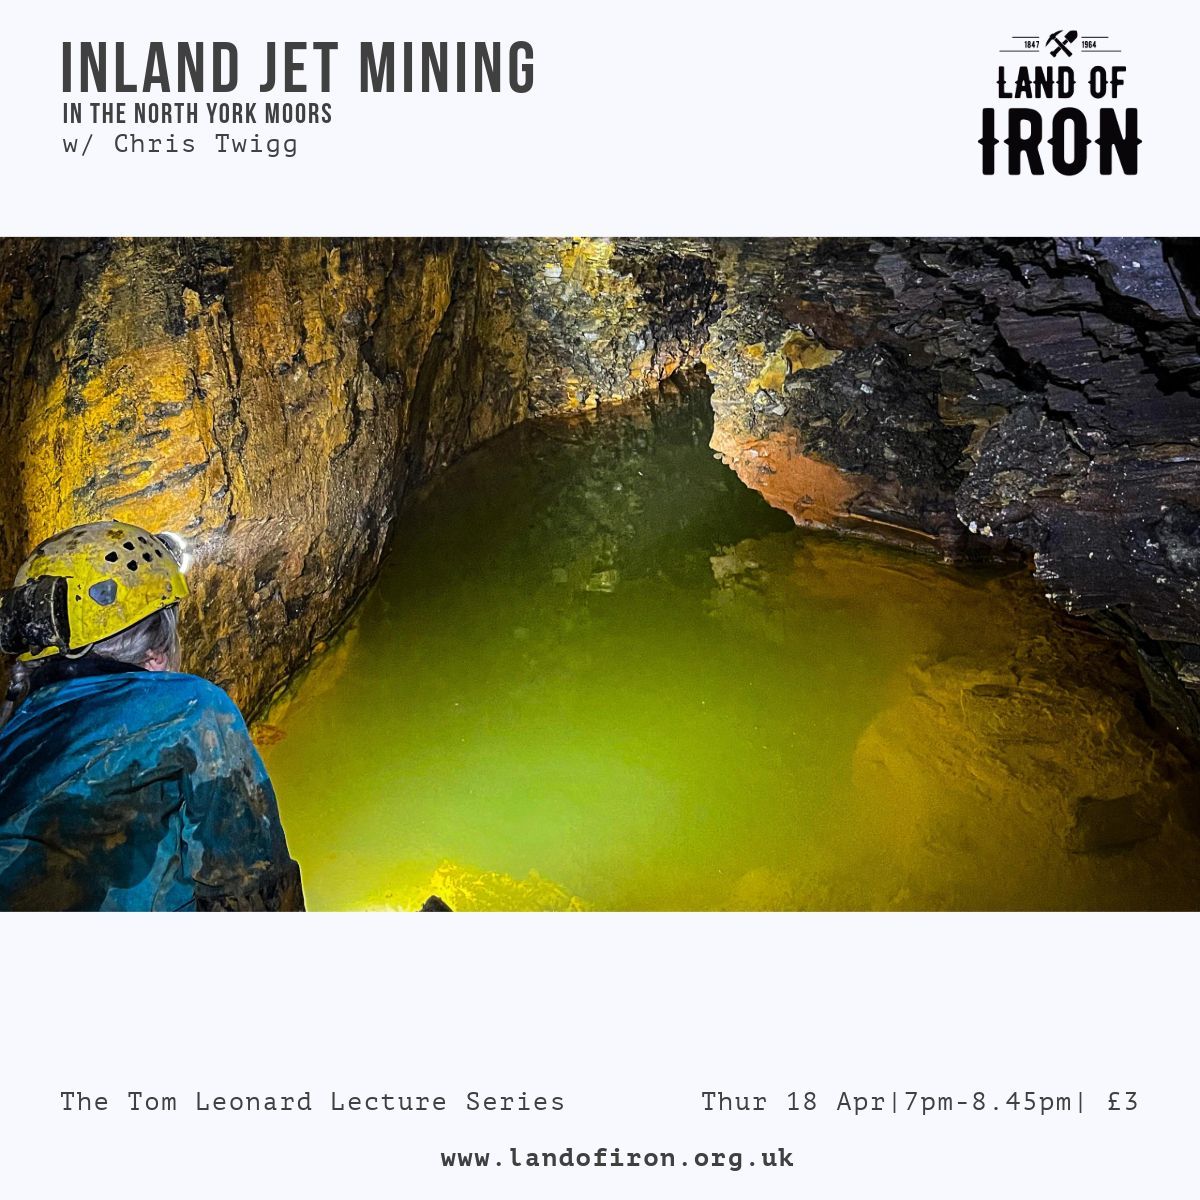 One week to go! Come and find out about the wider jet mining industry of North Yorkshire. It wasn't just from the cliffs. Want to know more? Come to Chris Twigg's talk next week here at Land of Iron.